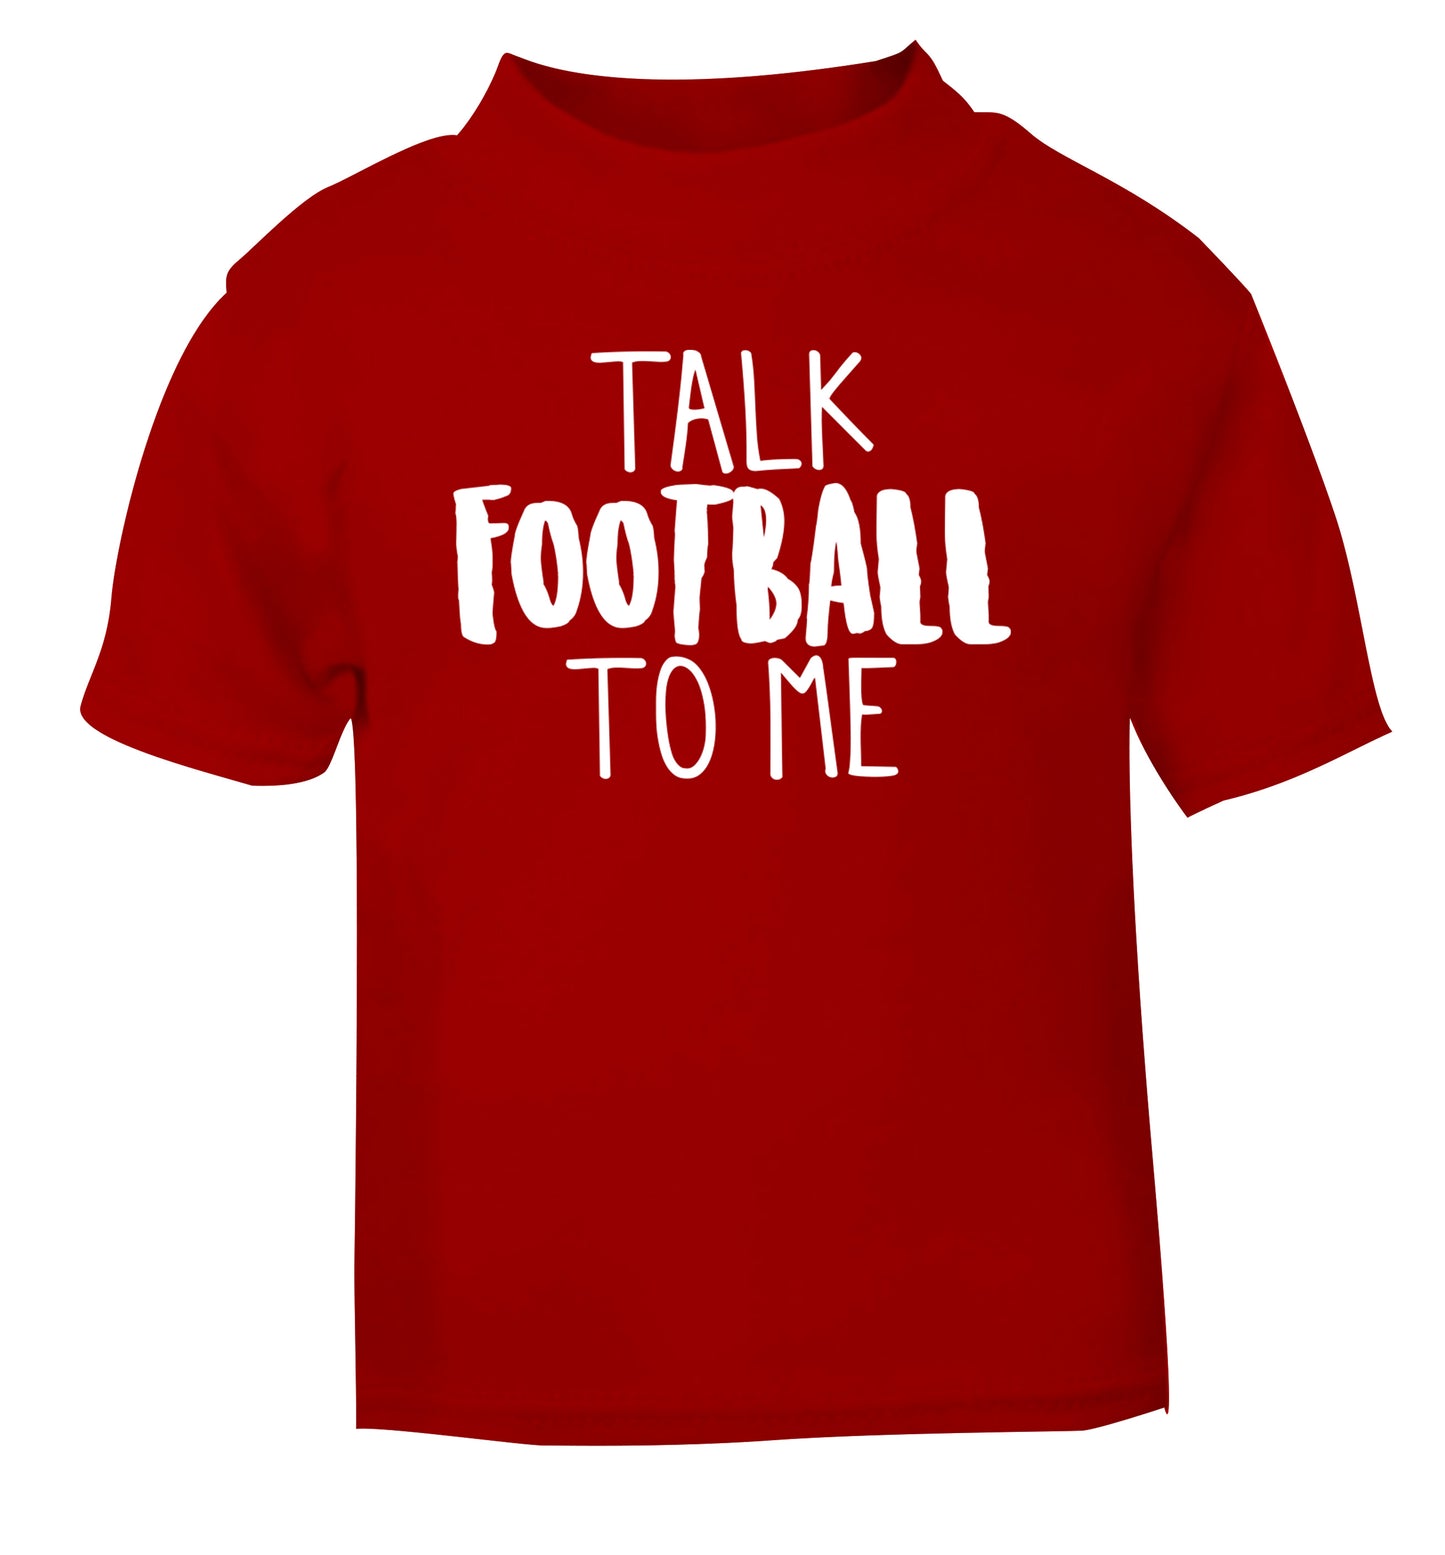 Talk football to me red Baby Toddler Tshirt 2 Years